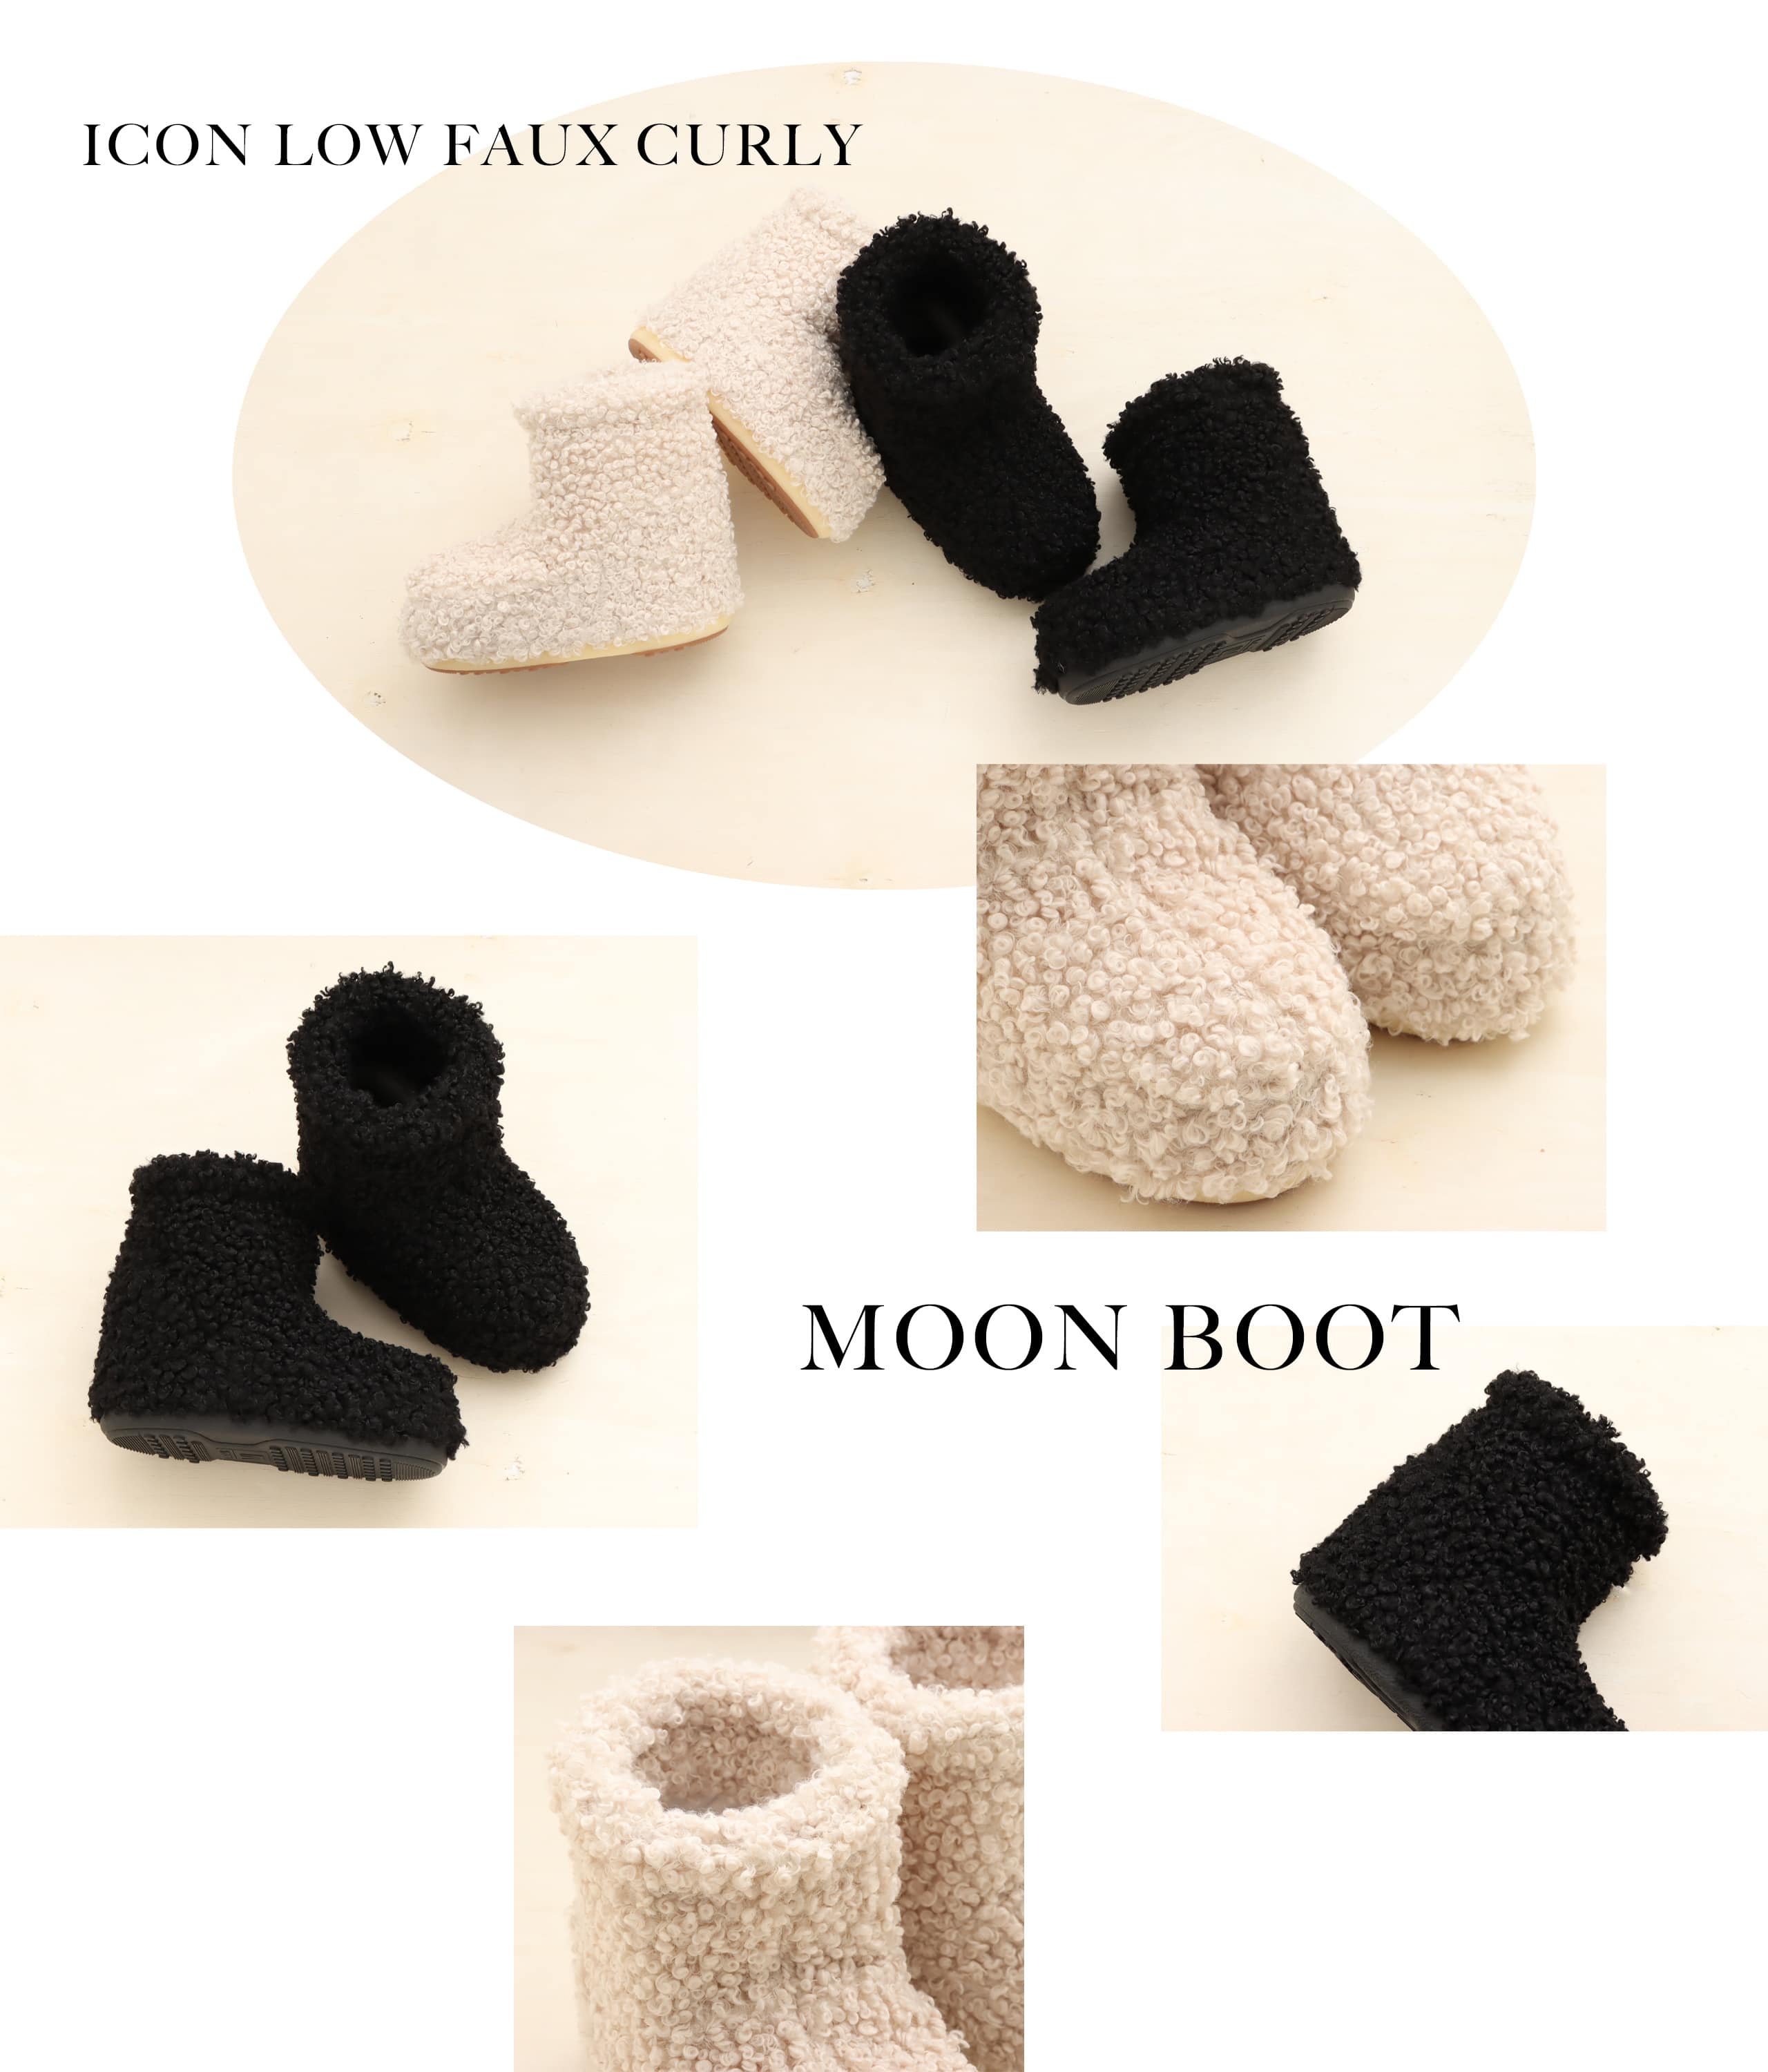 MOON BOOT ICON COLLECTION